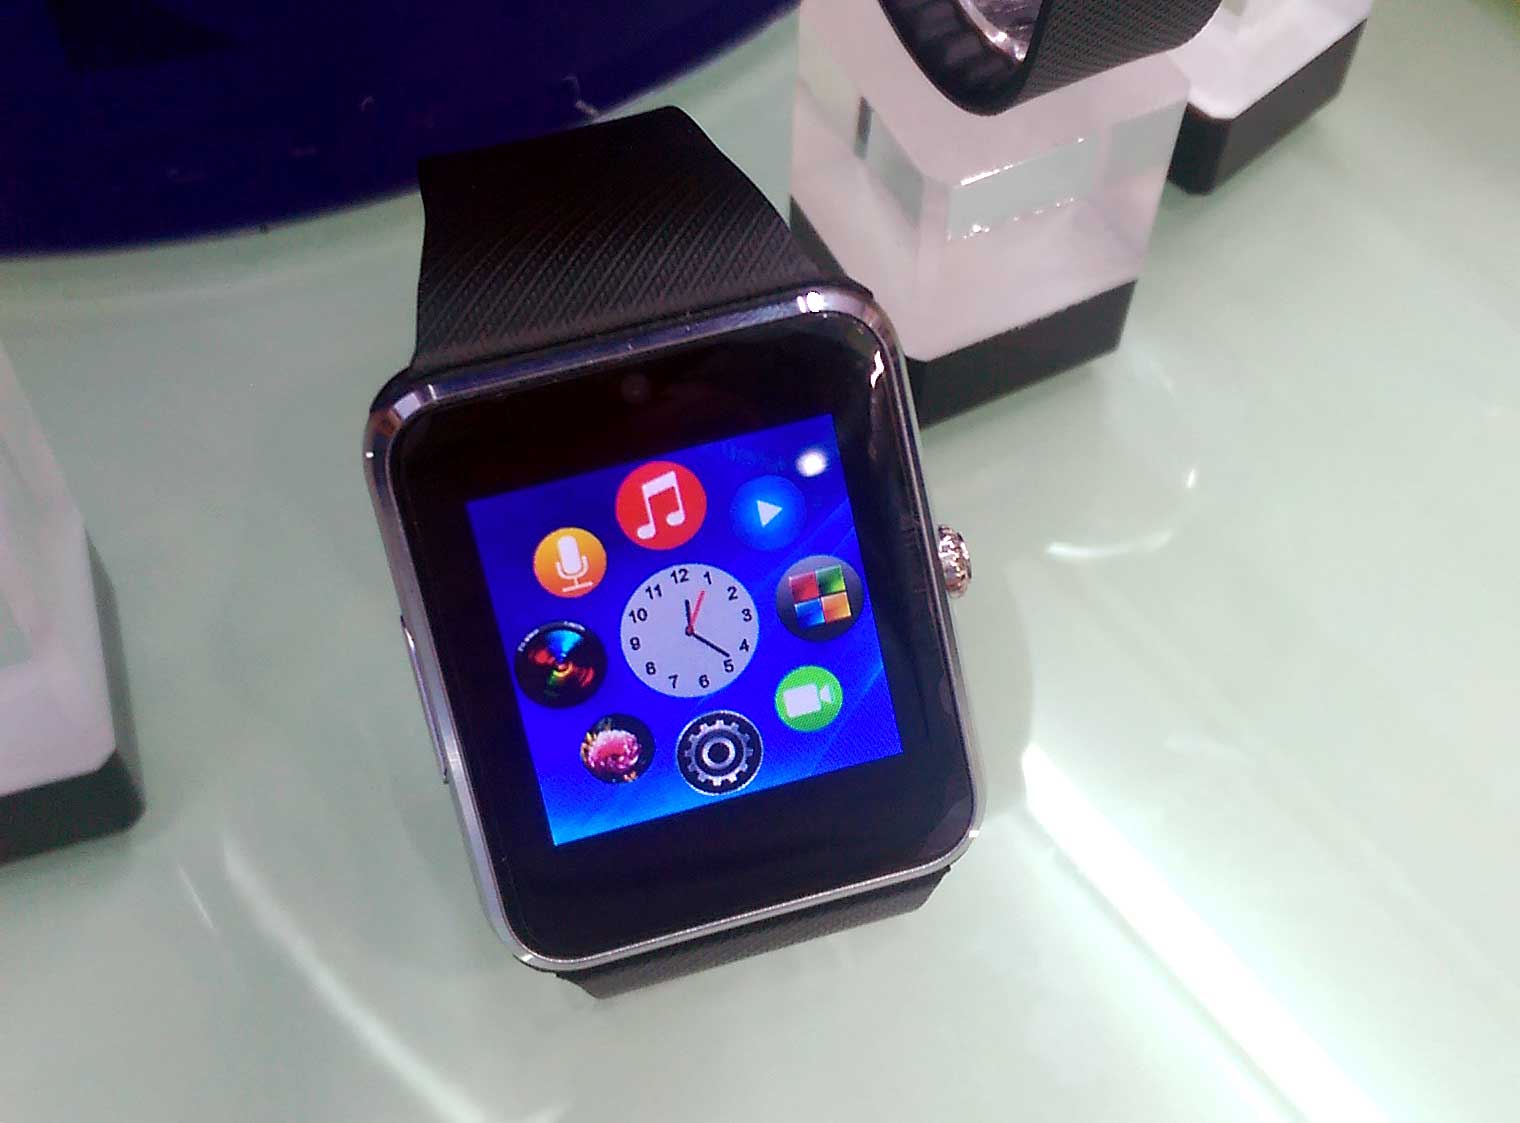 A replica Apple Watch on sale in China's Shenzhen City. For as low as $50, the smartwatch features a camera and allows phone calls without the need for a smartphone connection.
